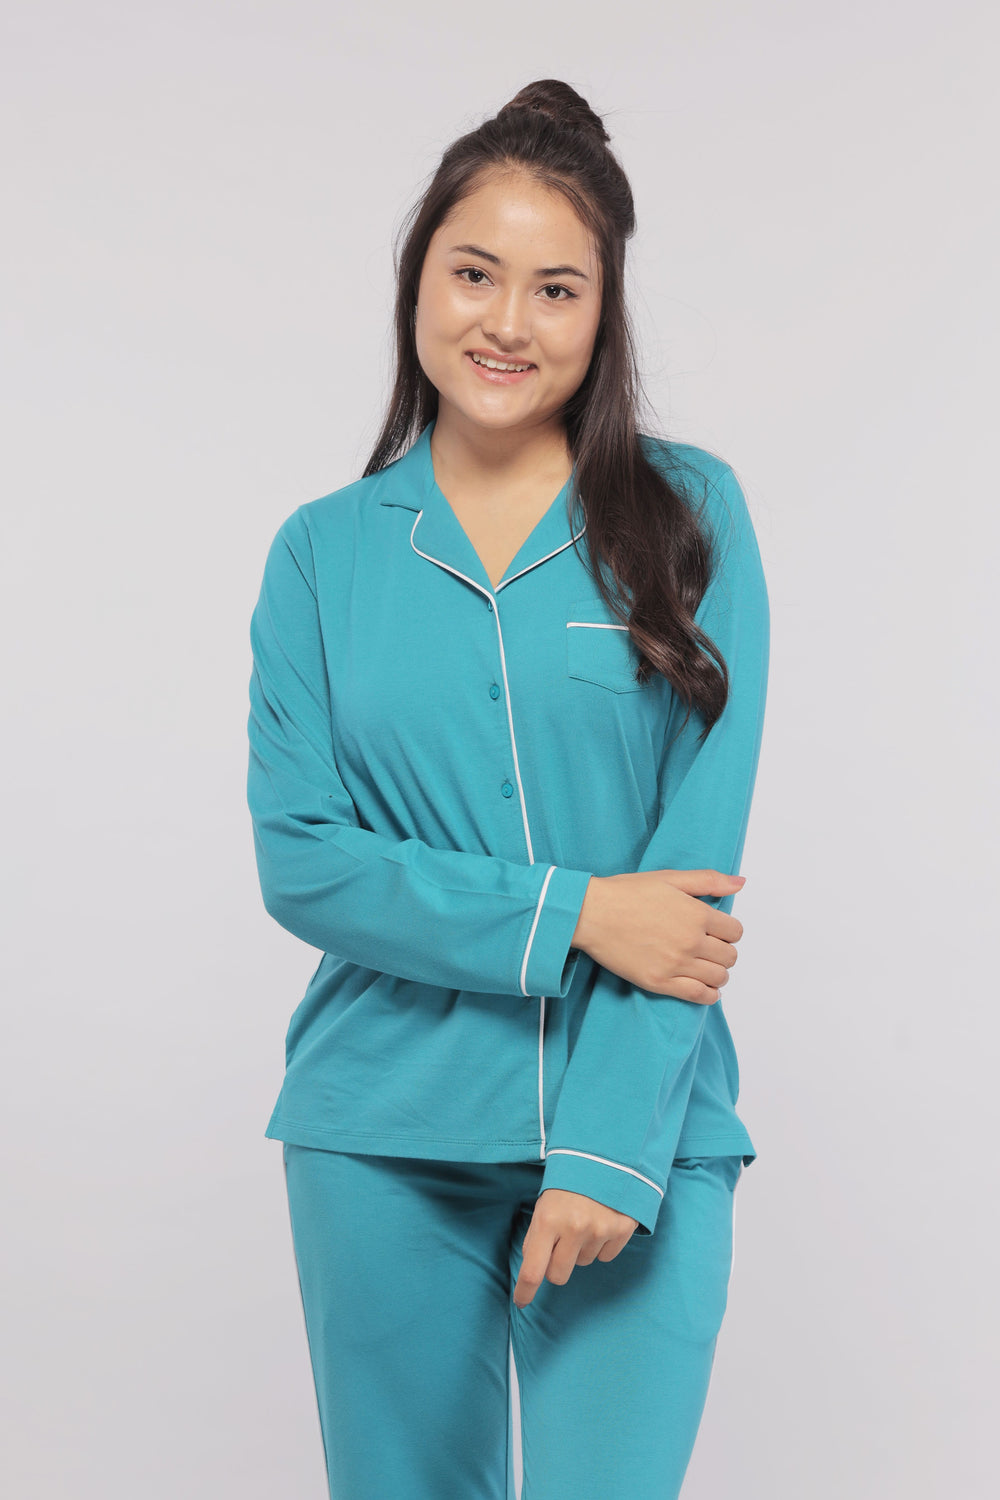 Teal Full Sleeve Button Down With White Piping Tee